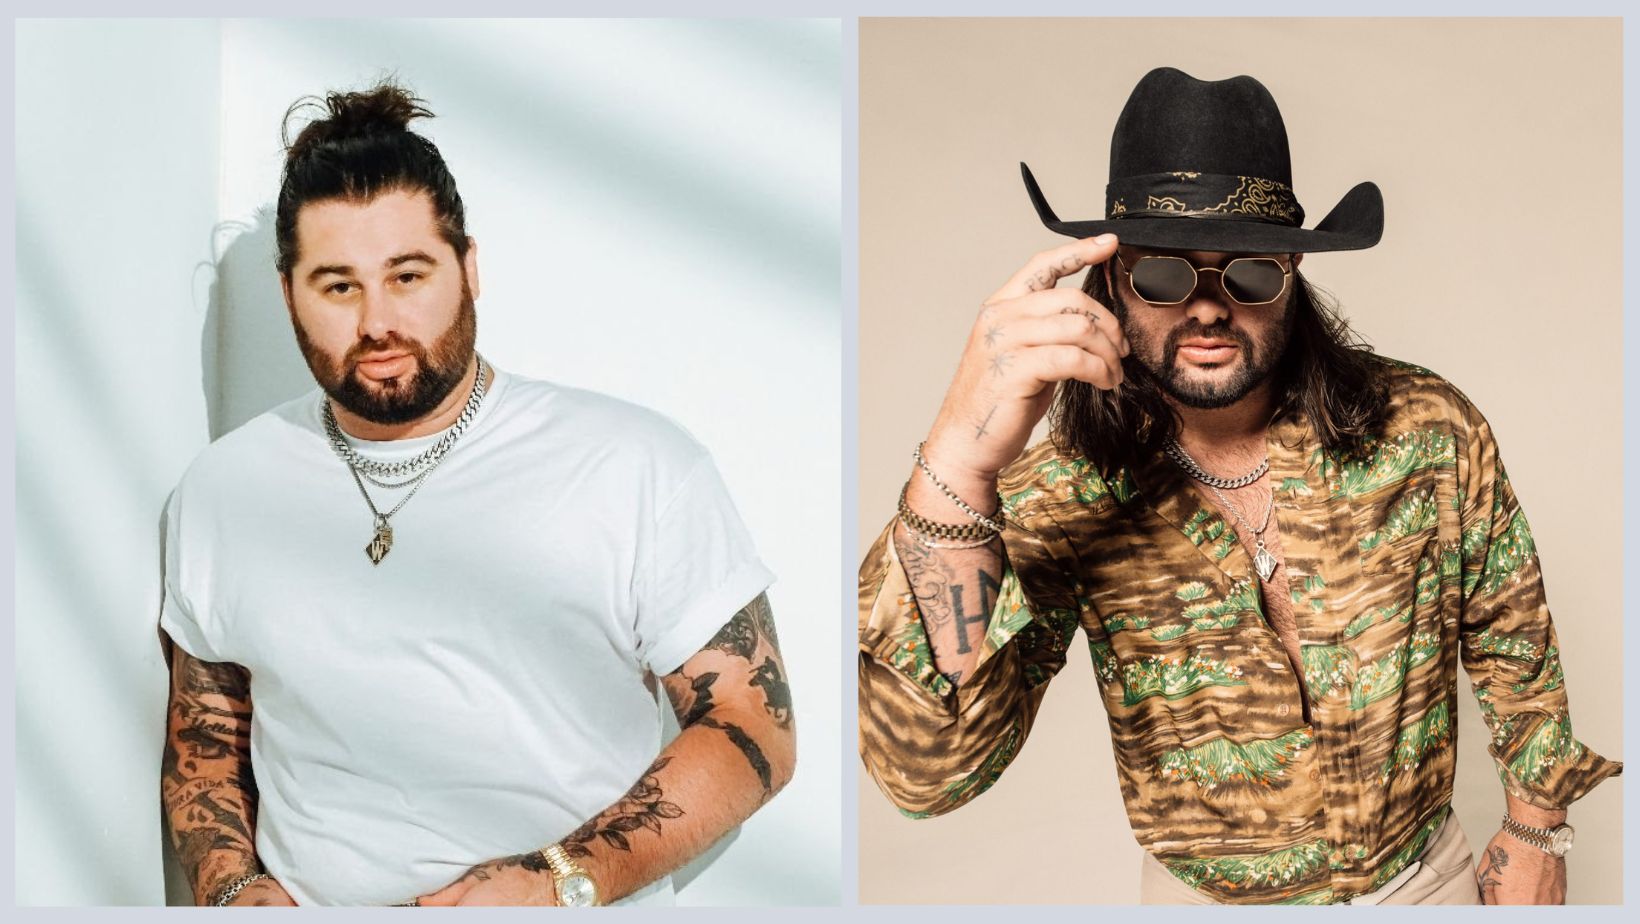 Is Koe Wetzel Still Dating Or Married To Bailey Fisher?